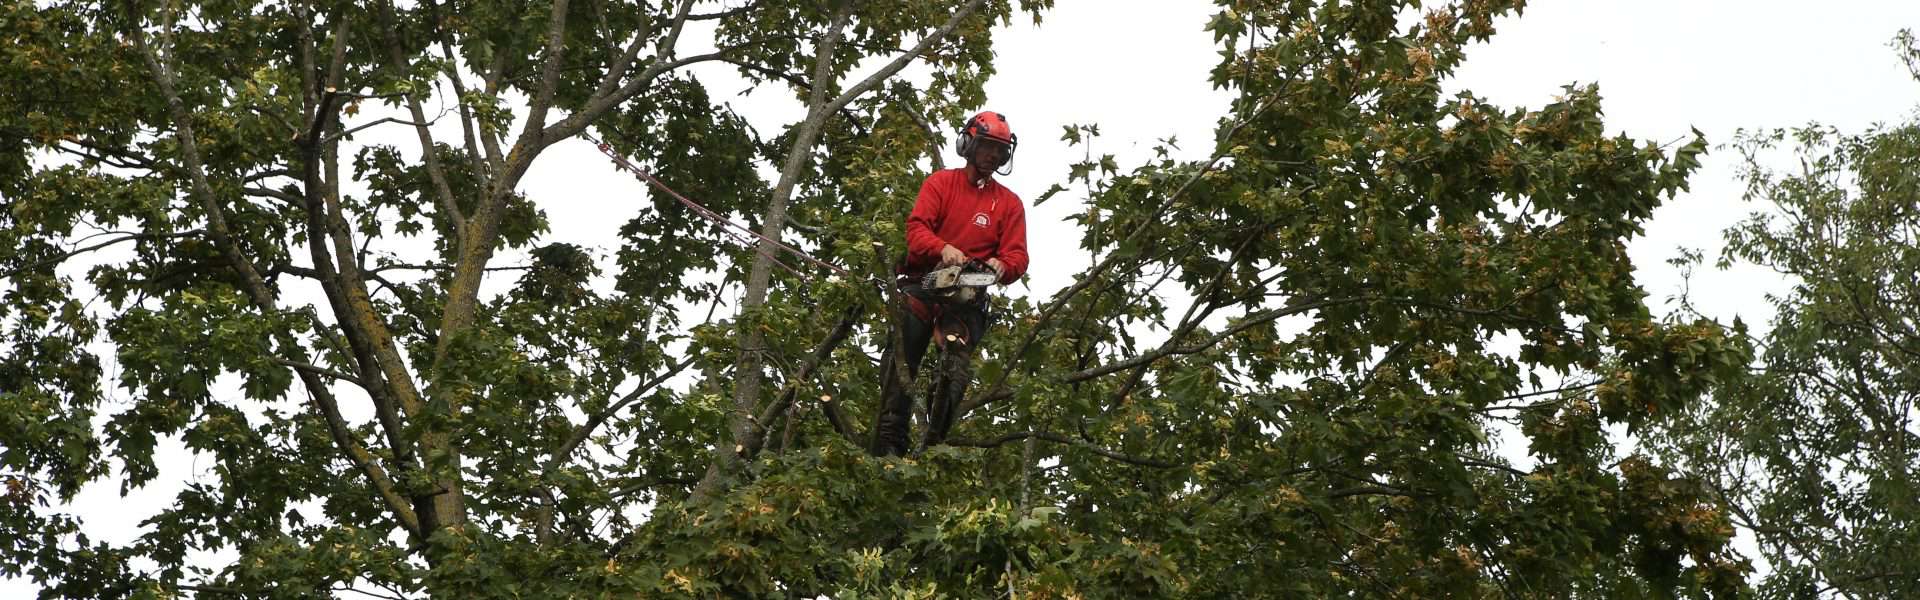 A member of the Connick Tree Care team working high up in a tree